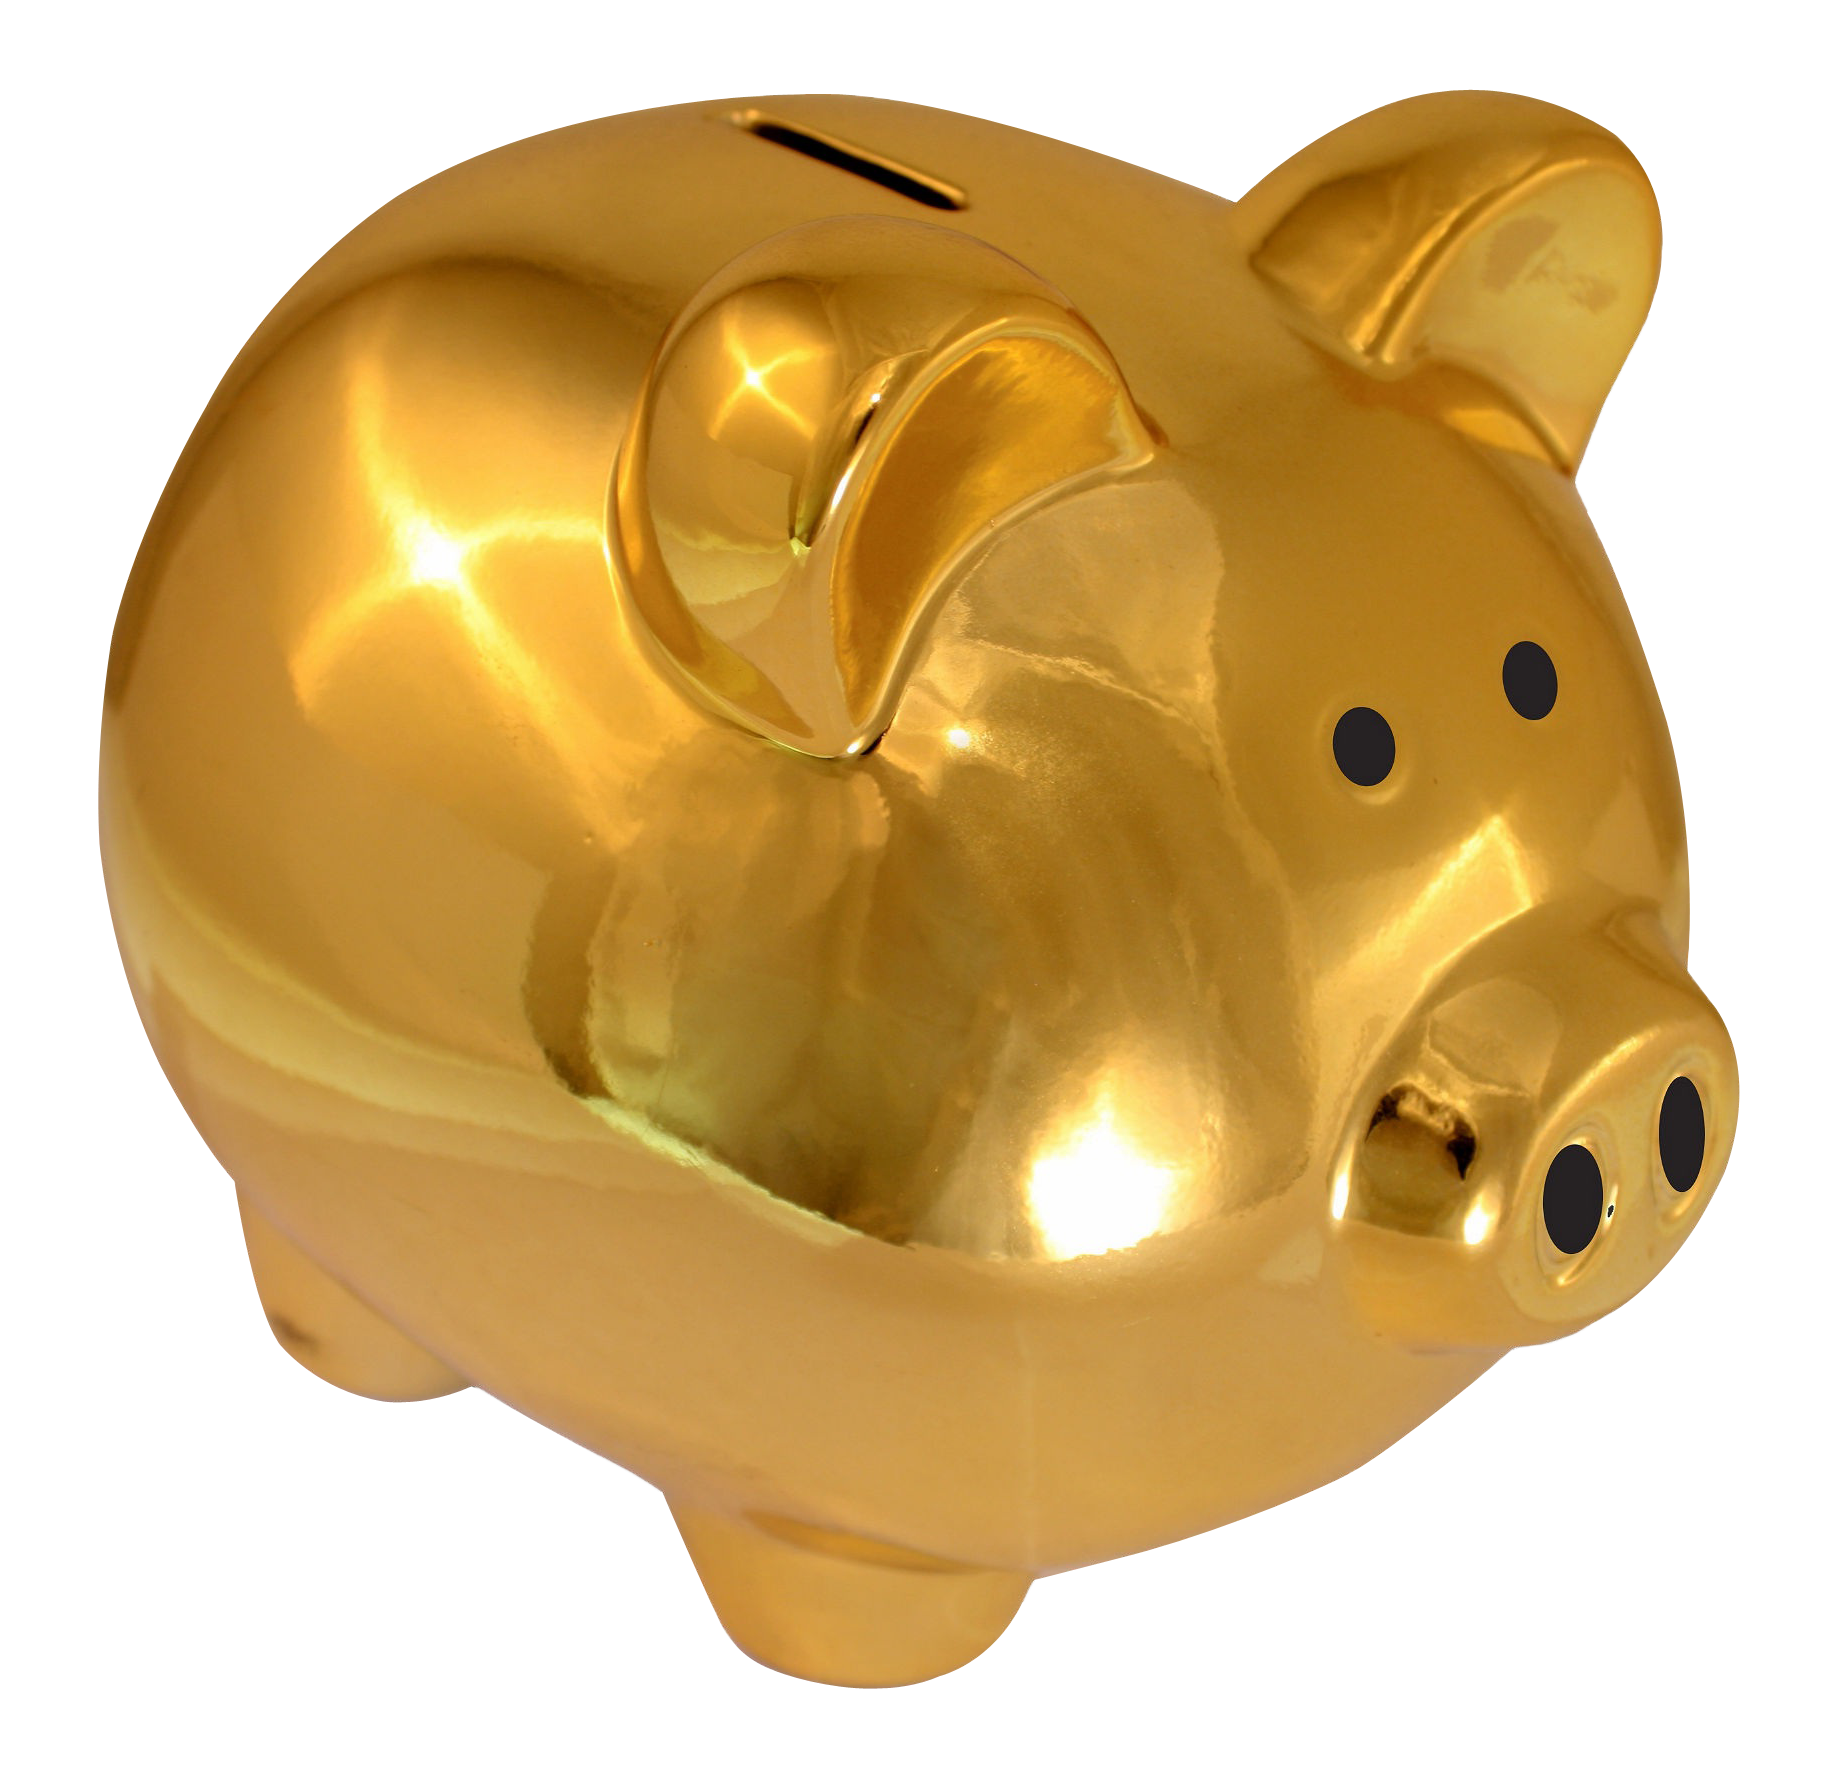 A Gold Piggy Bank With Black Background